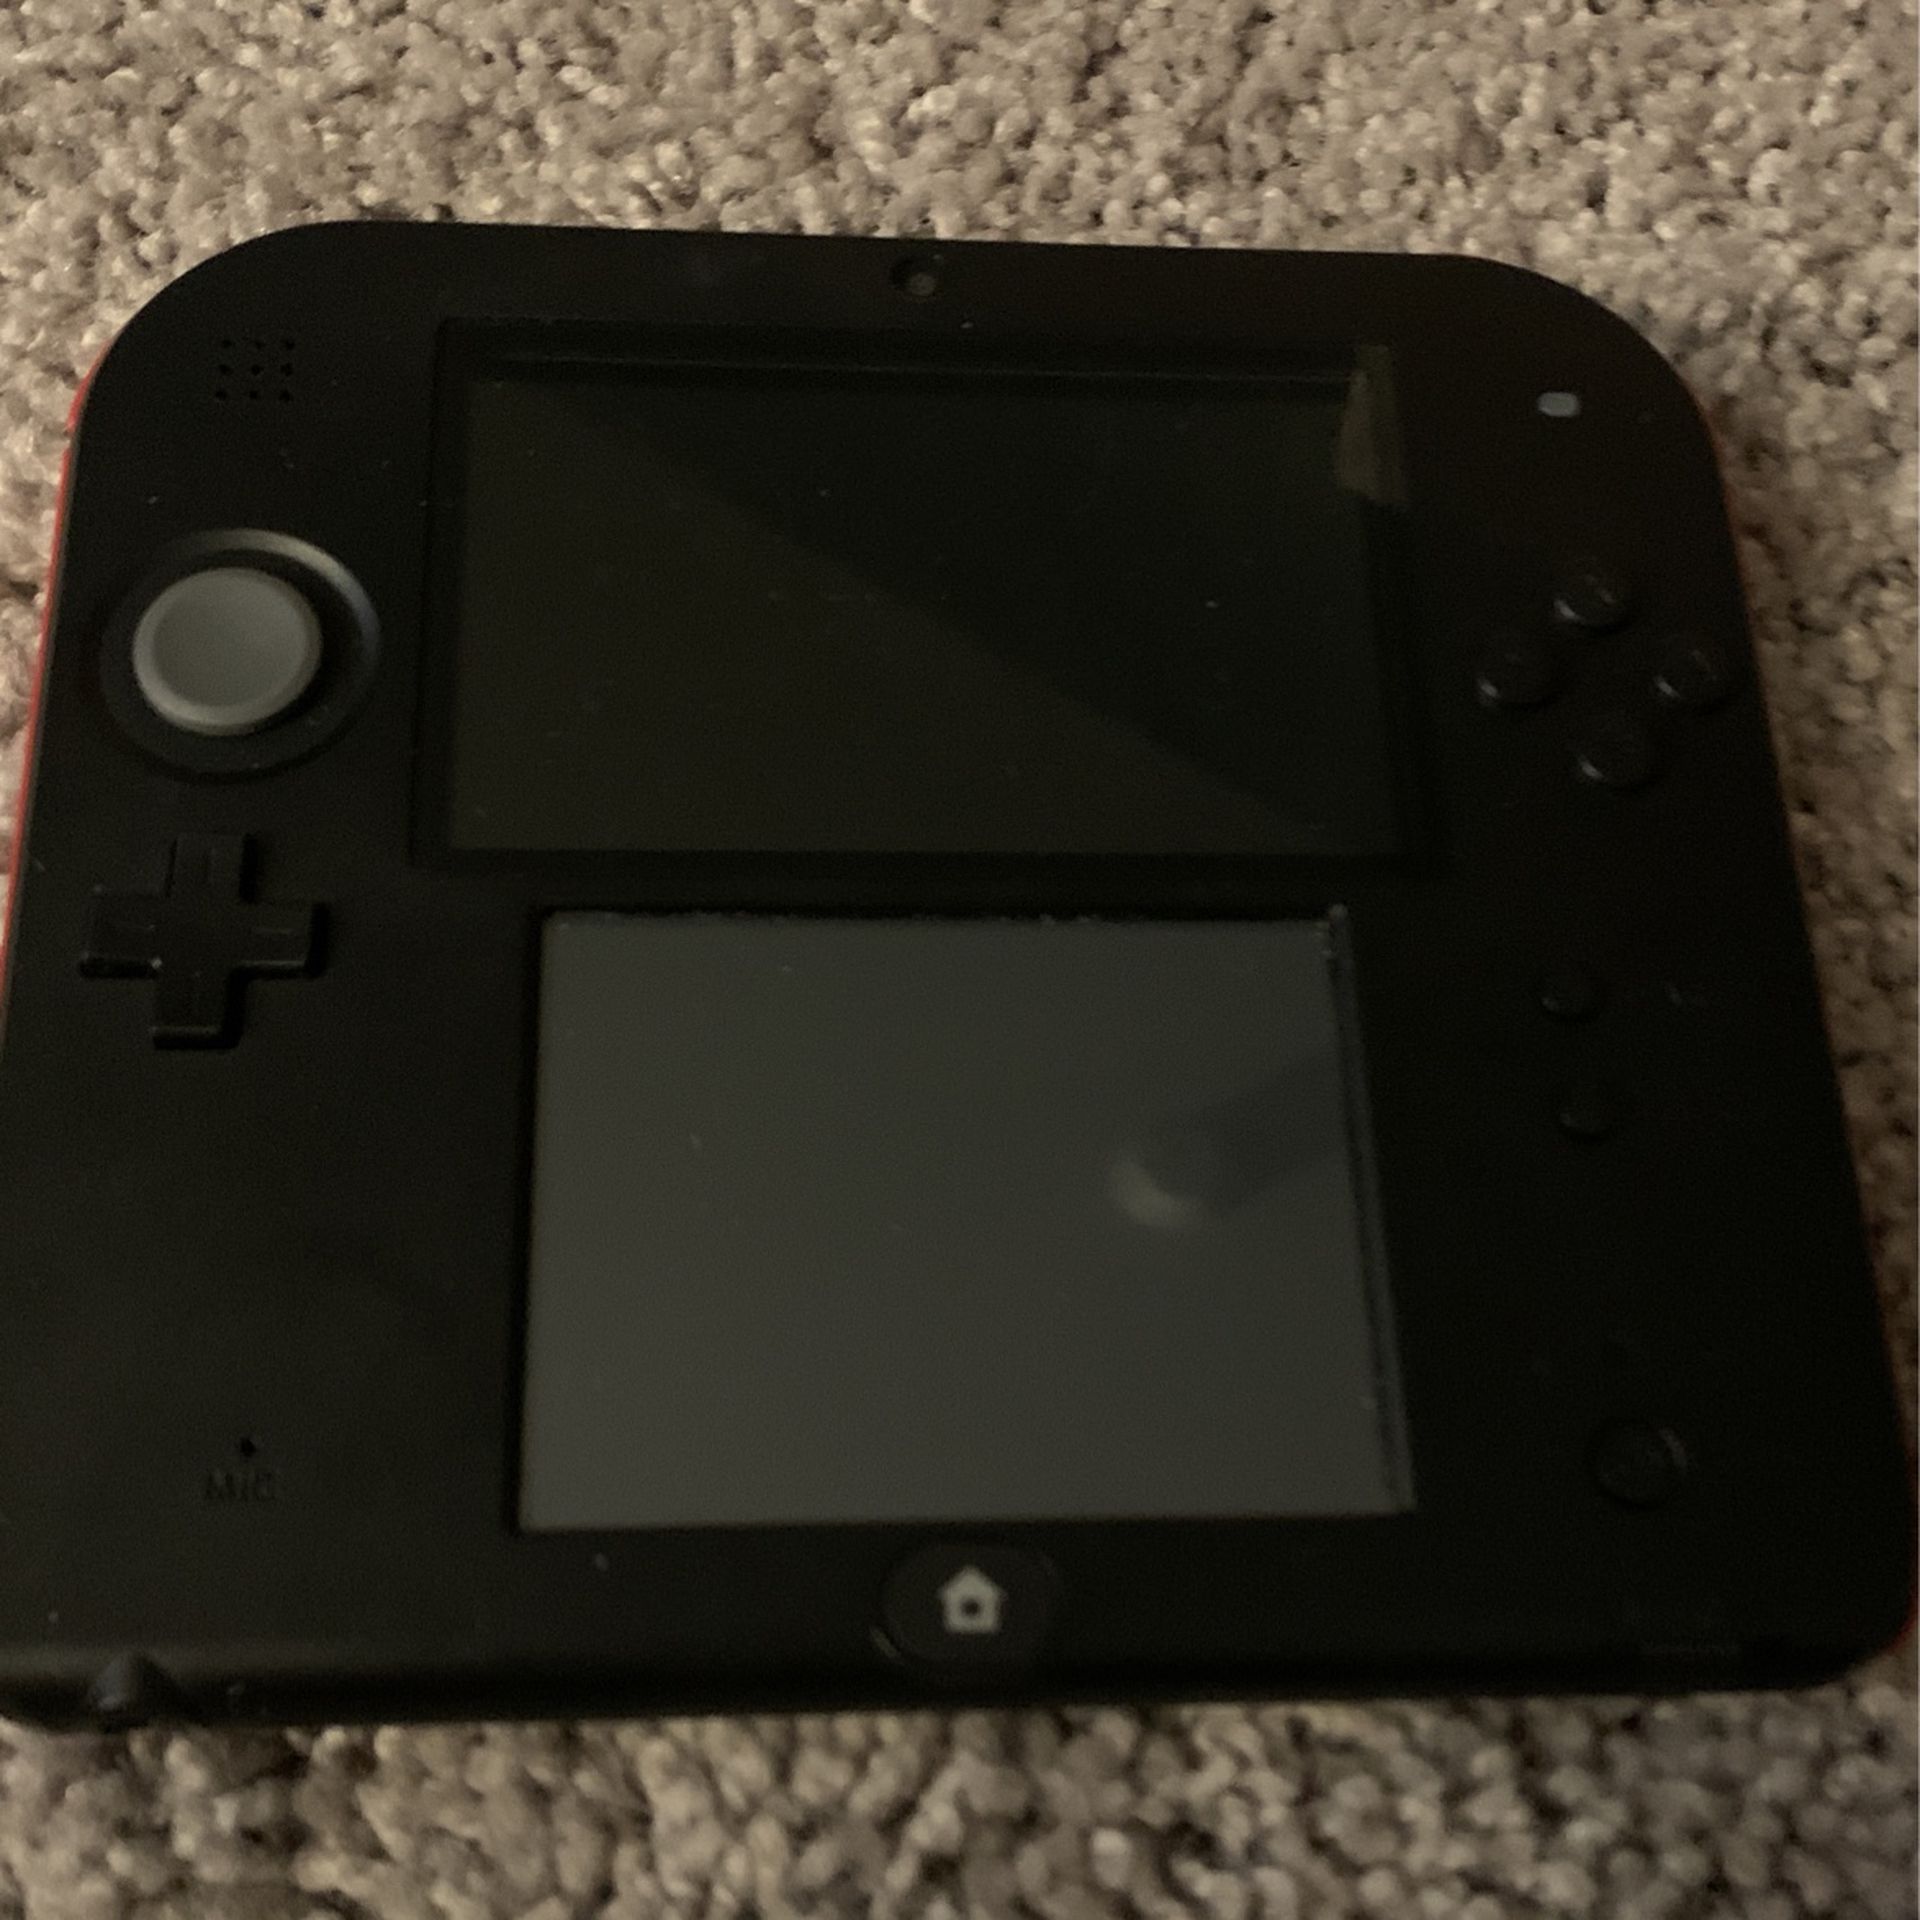 NiNTENDO 2ds Black And Red